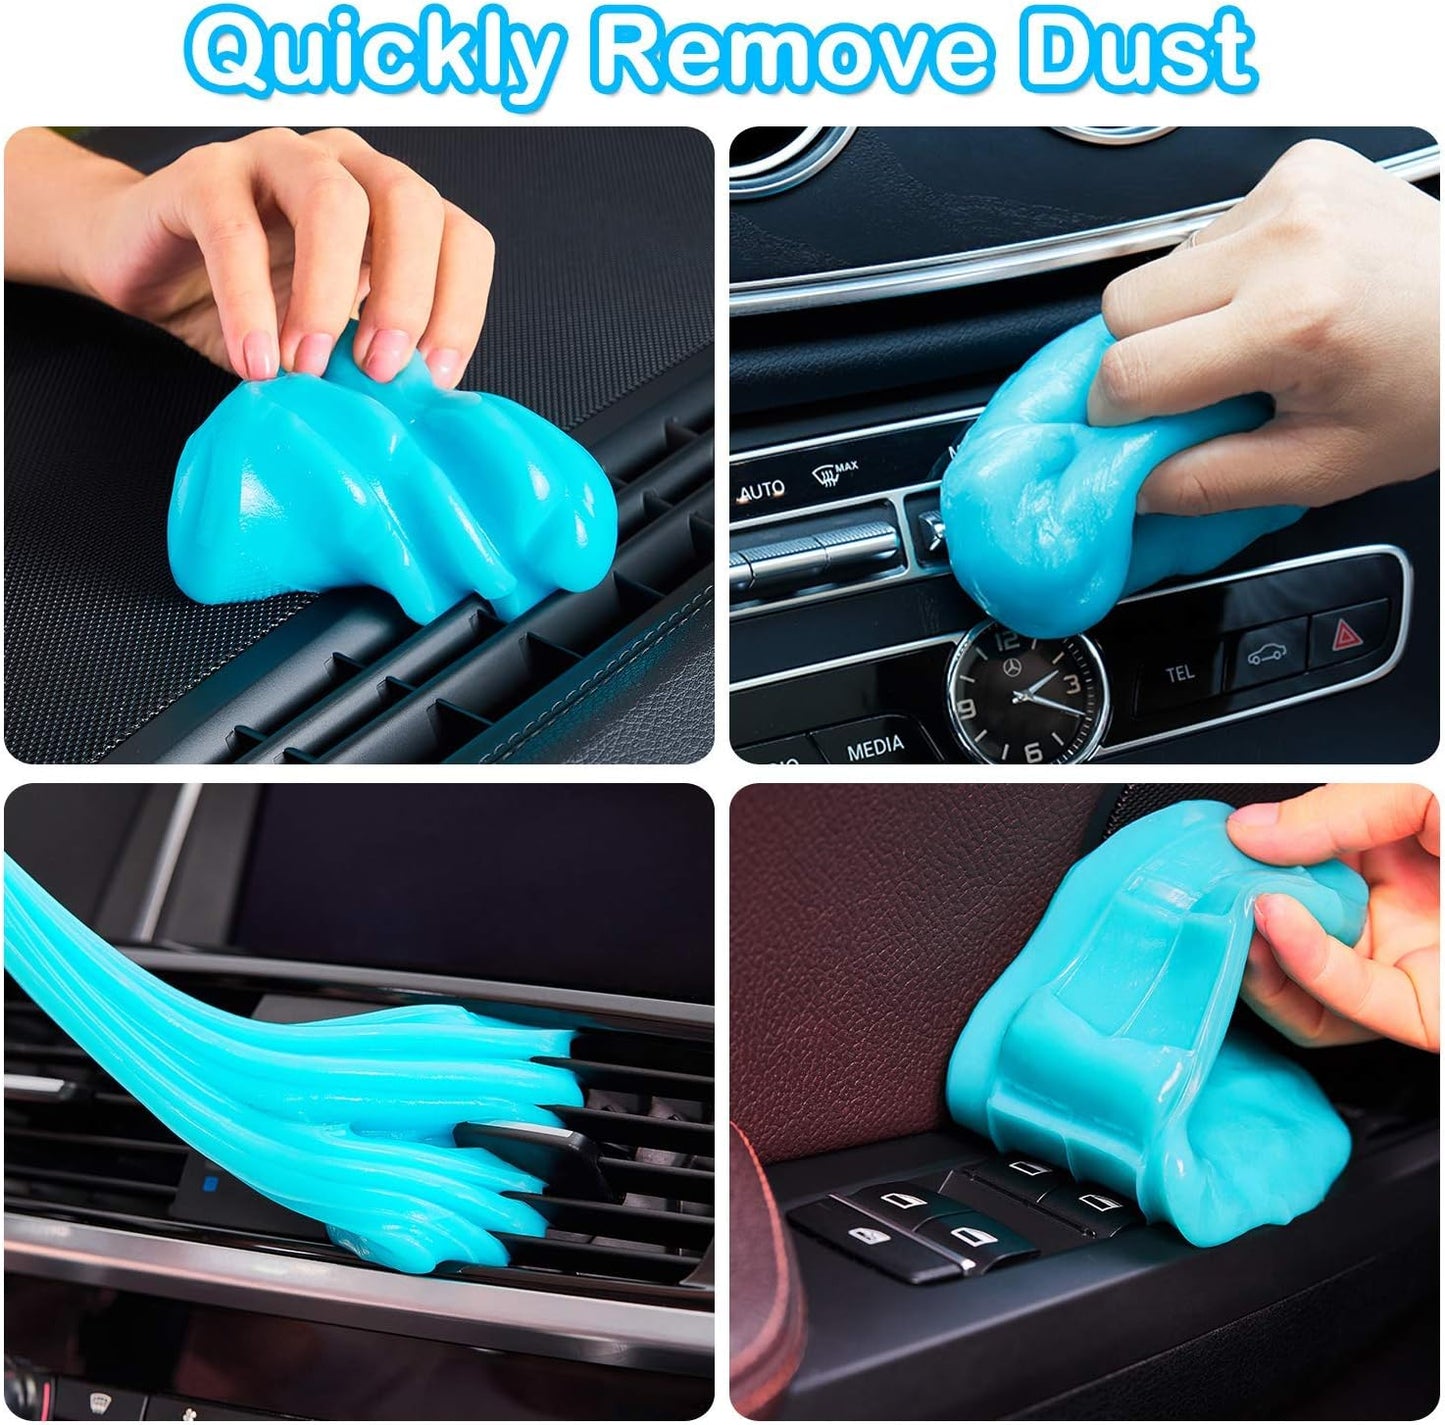 UniitesMarketplace.com™, PULIDIKI Car Cleaning Gel Kit Universal Detailing Automotive Dust Car Crevice Cleaner Slime Auto Air Vent Interior Detail Removal for Car Putty Cleaning Keyboard Cleaner Car Accessories Blue, $6.91